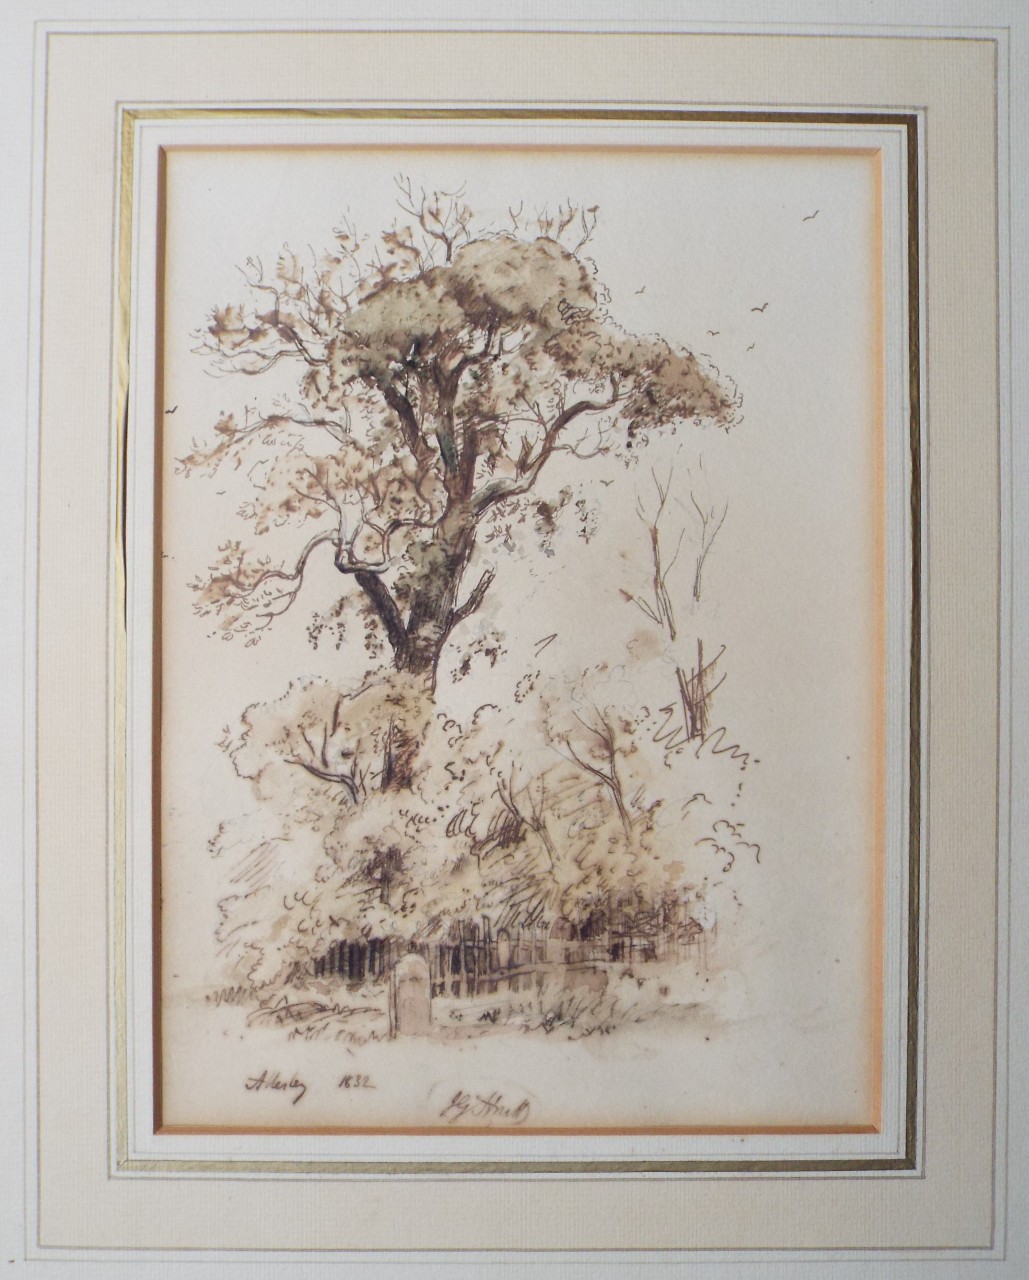 Ink and watercolour - Allesley 1832